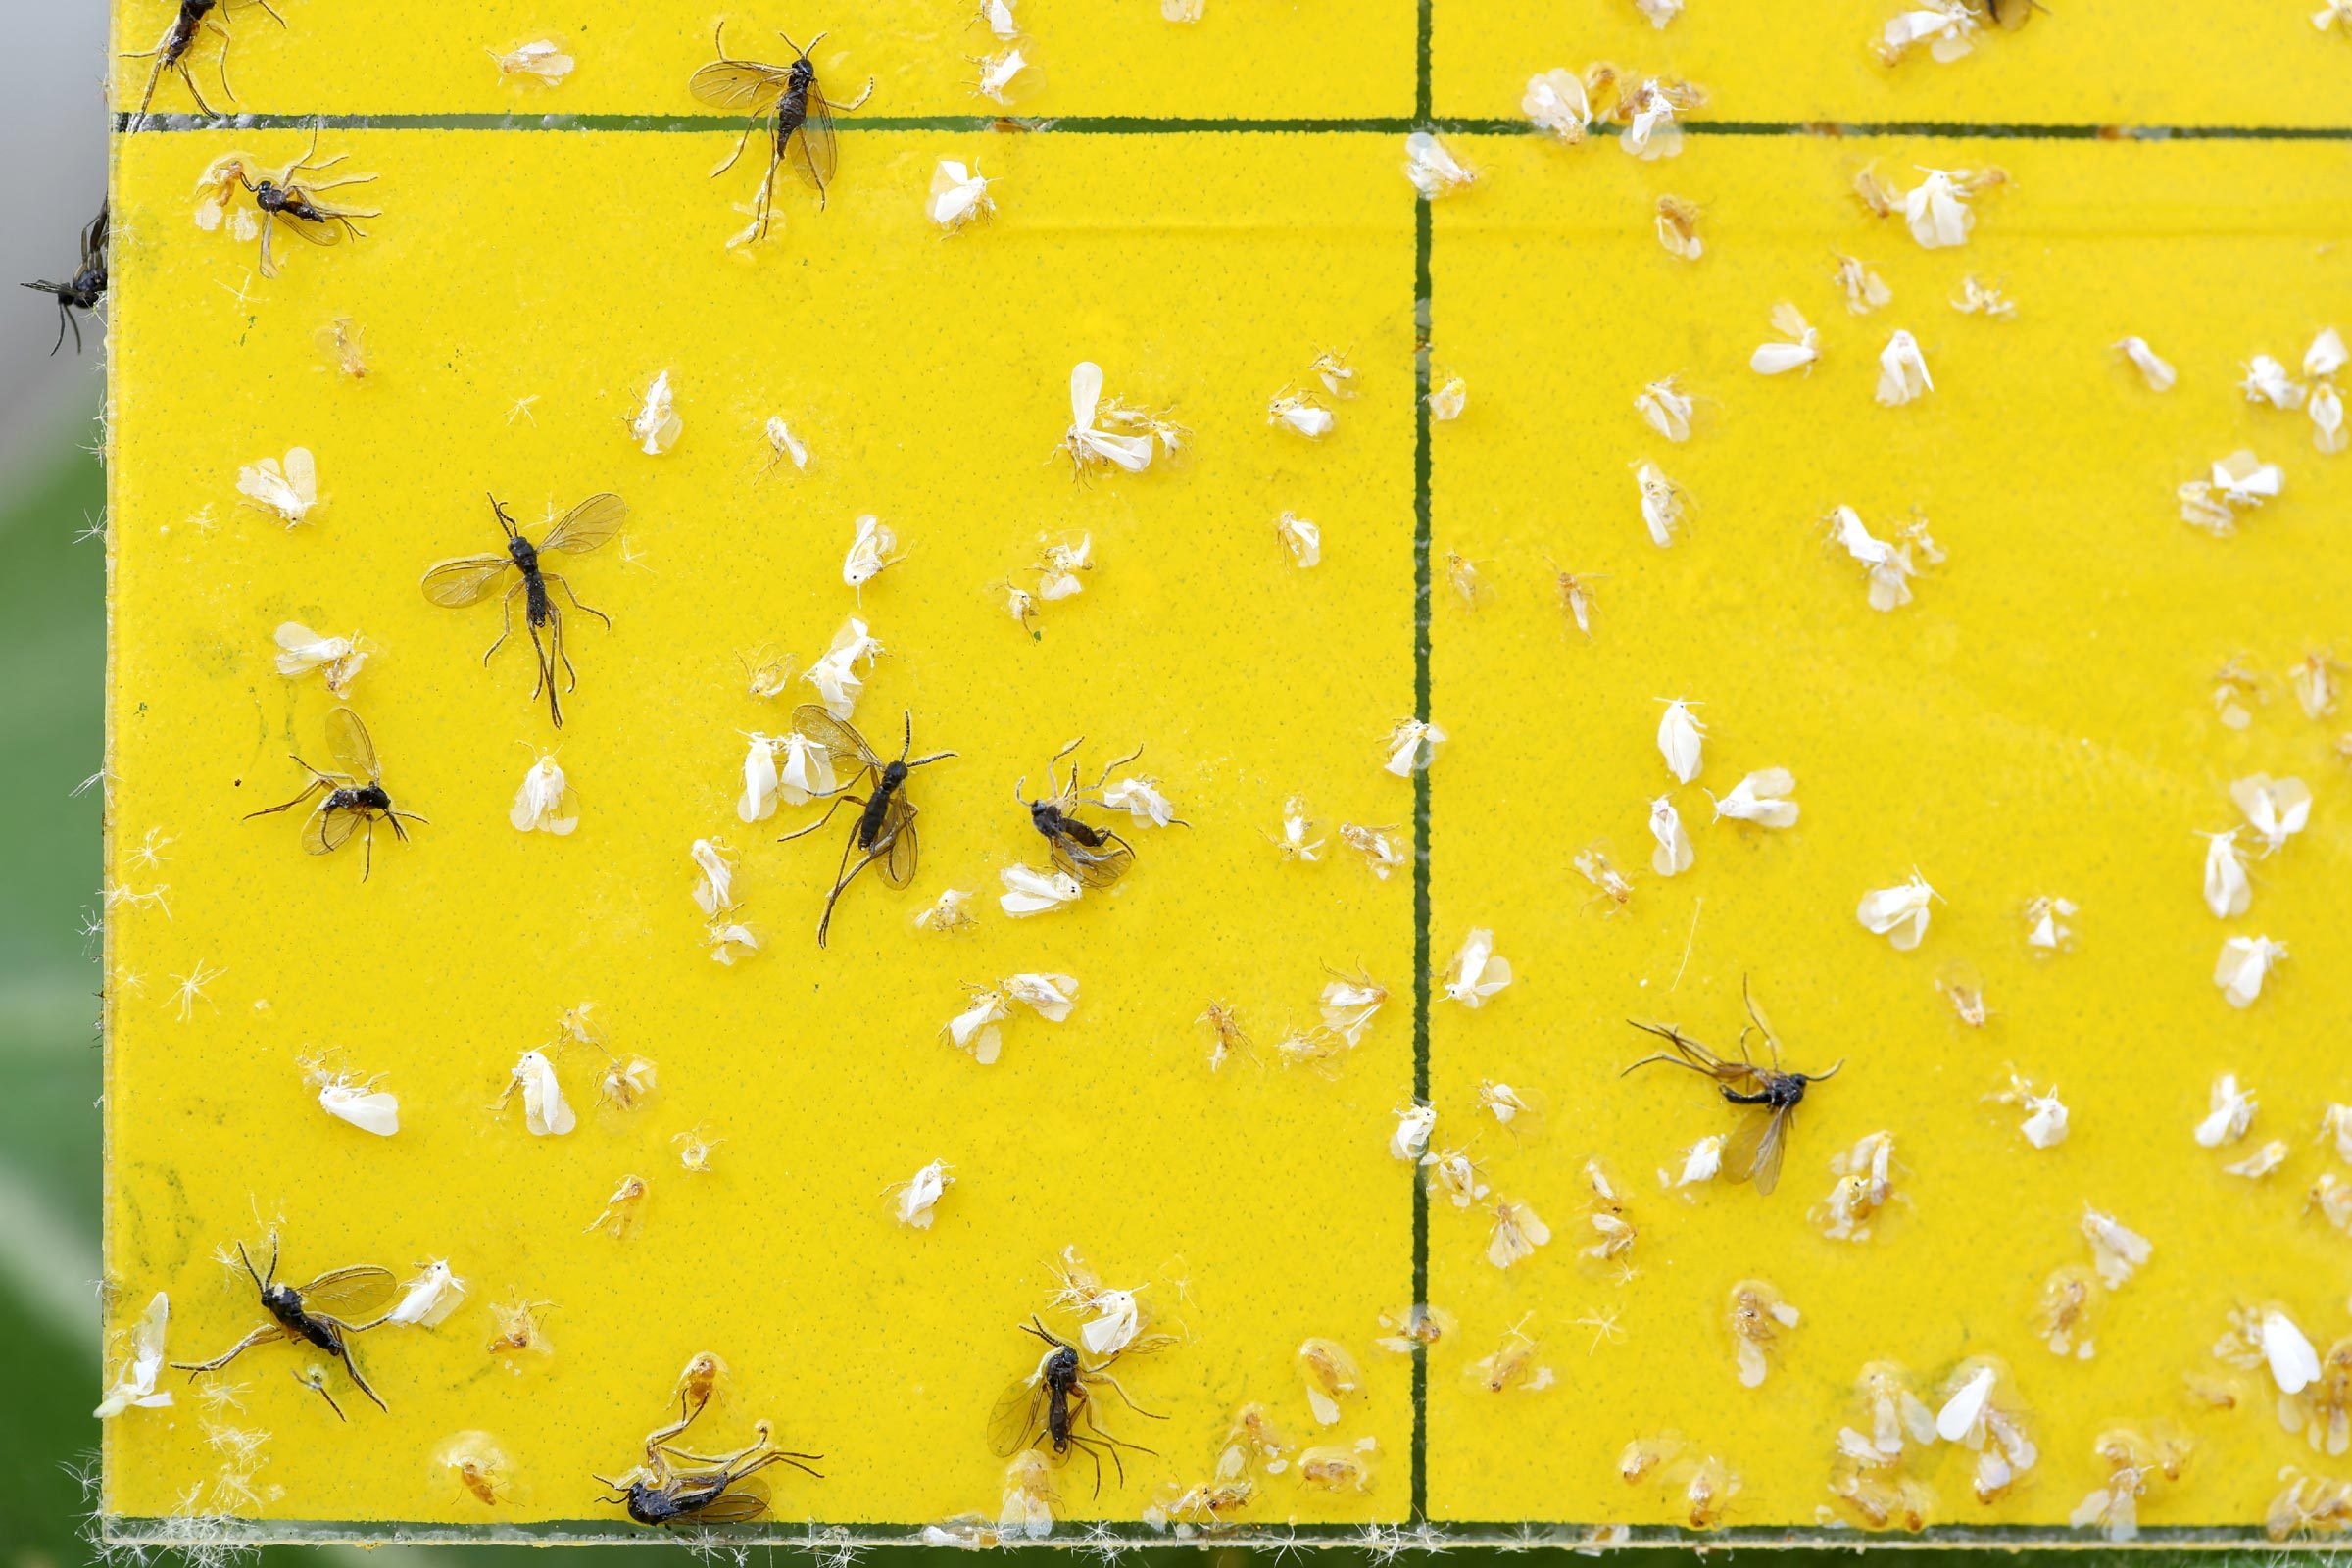 How to spot and remove fungus gnats